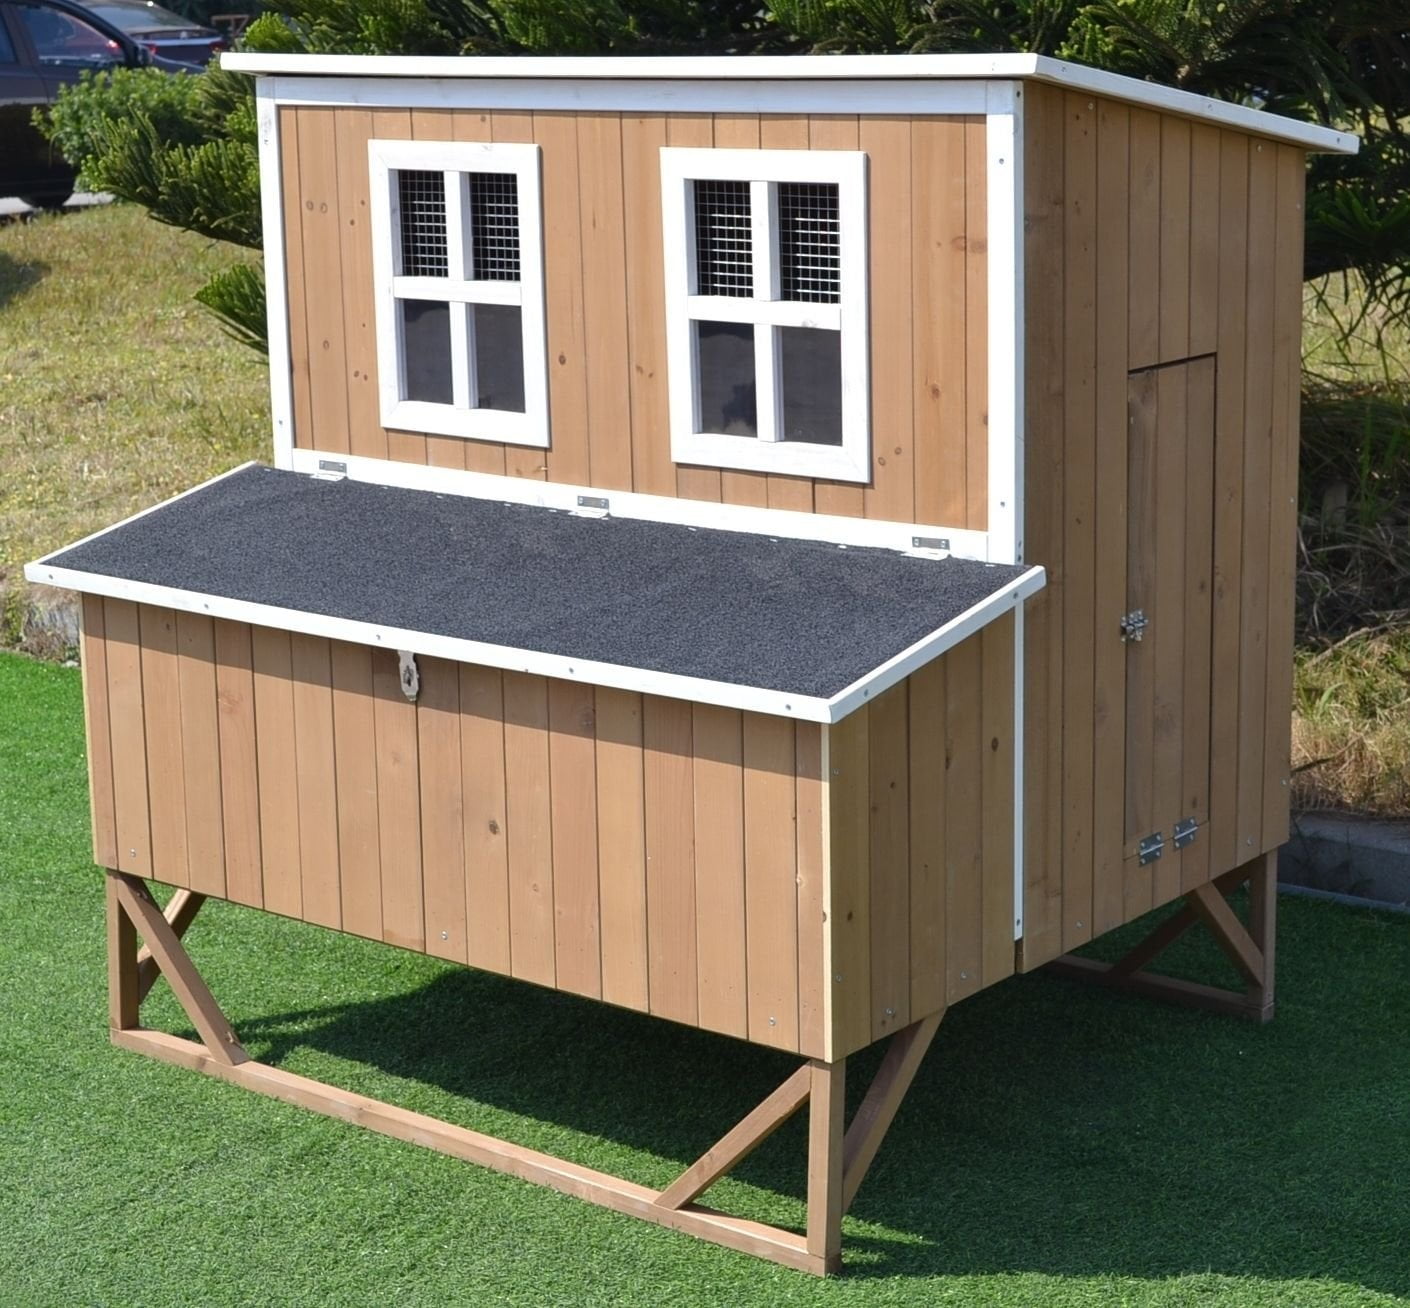 Large Wood Chicken Coop Hen House 4-8 Chickens 4 Nesting Box - 40acc33f Dc7a 49f5 B59a 47675e34349a 1.8ca3b5fca2a6abfeaD716fa8aeD90b3D